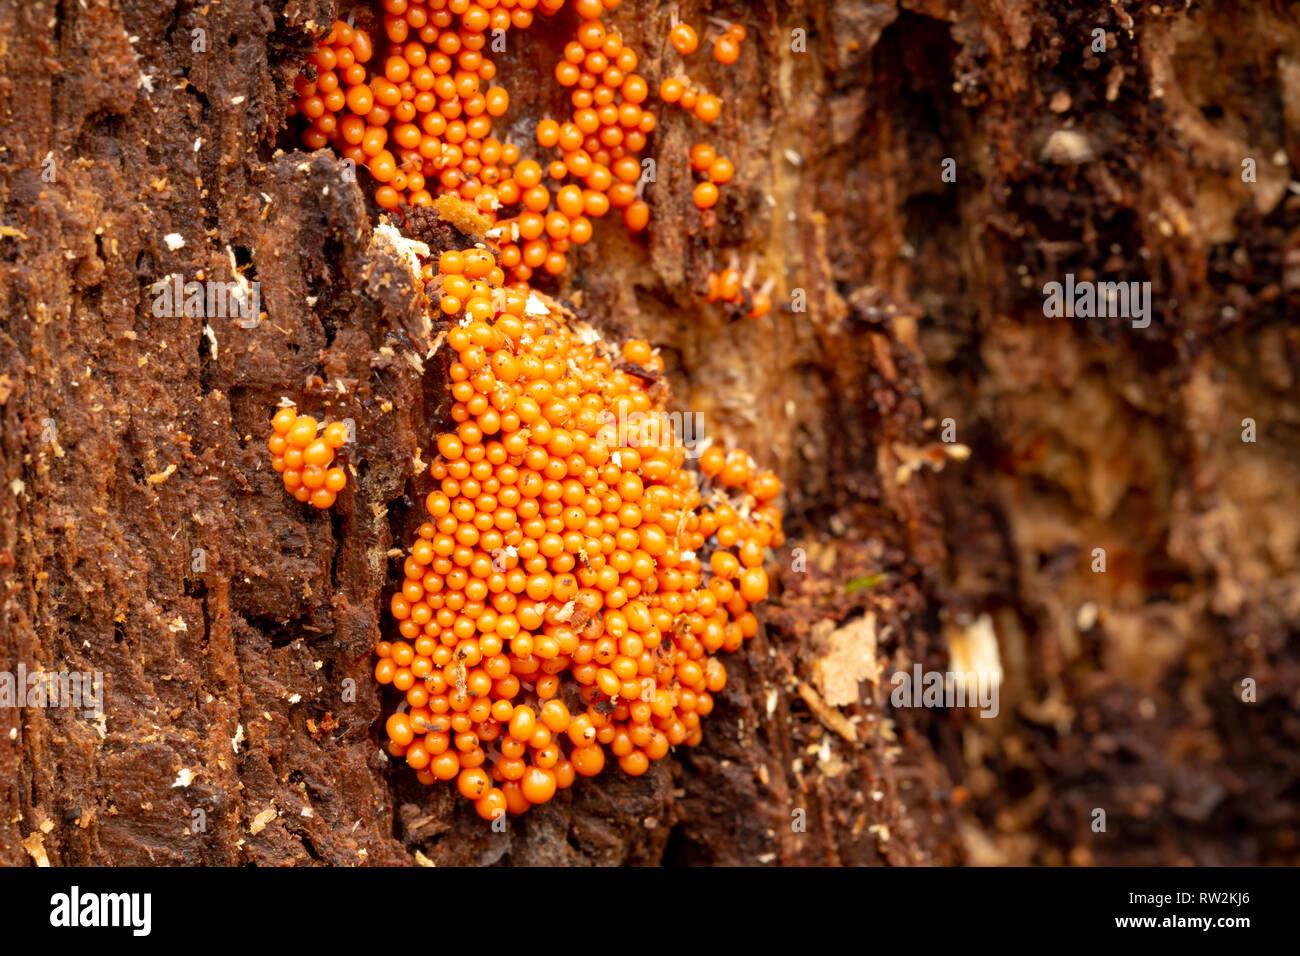 Close-up photograph of Yellow spot fungus (Nectria peziza) crowded together on side of dead tree trunk. Stock Photo